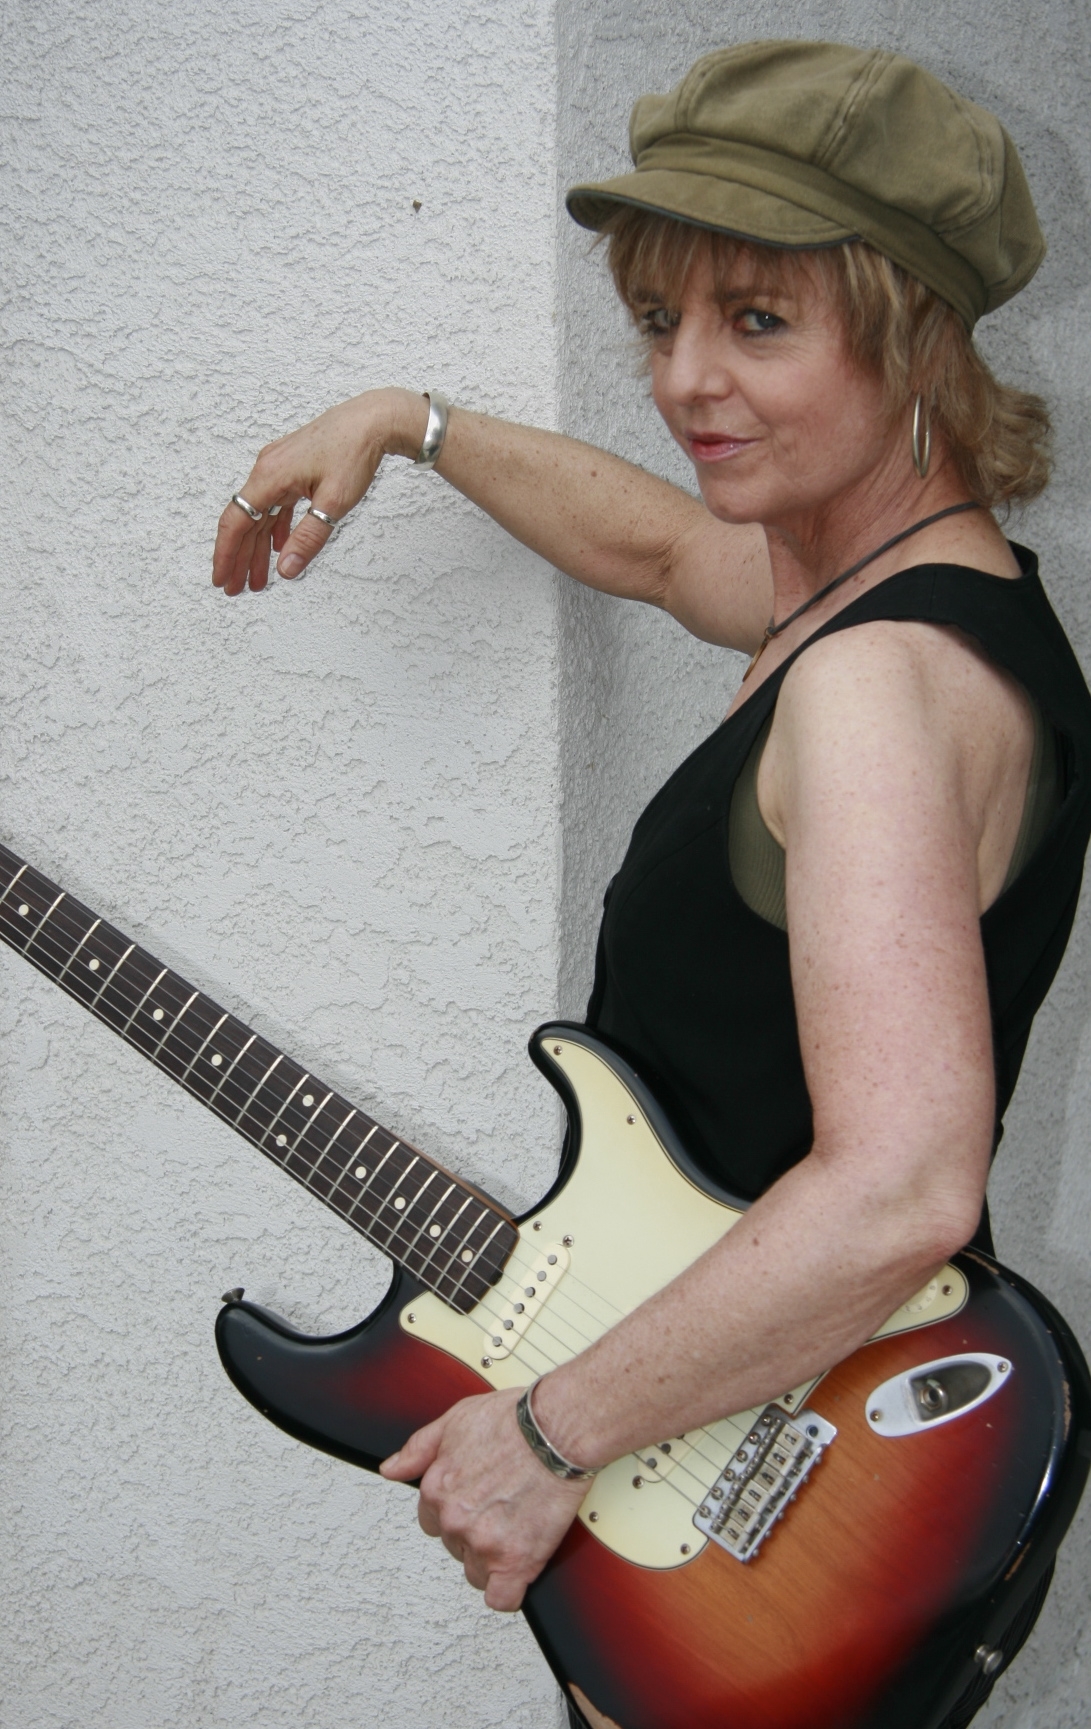 The walls will certainly shake Friday, when Debbie Davies brings her road-w...